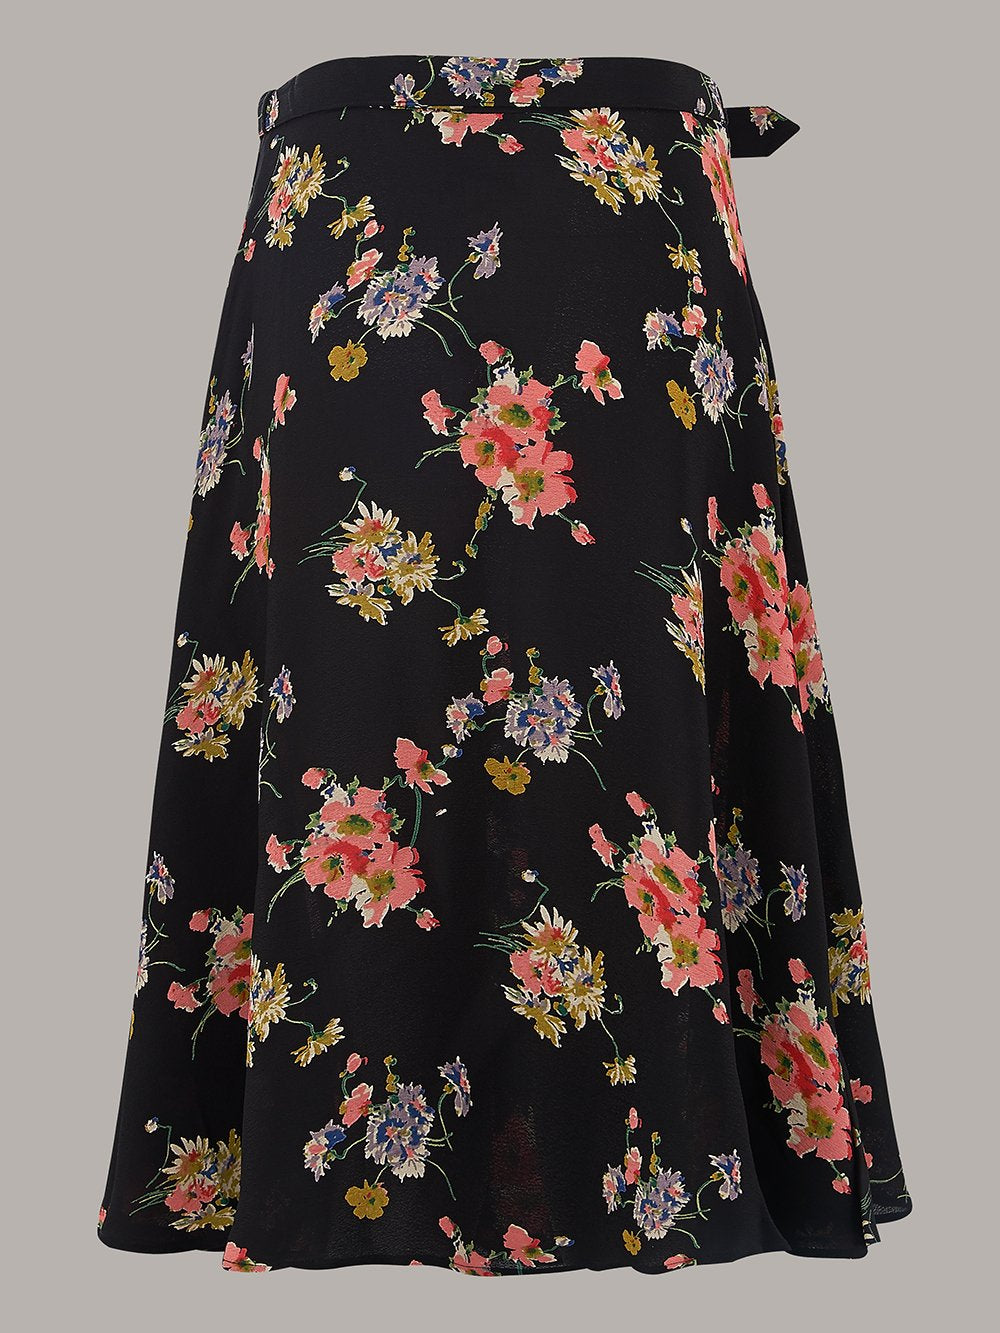 Circle Skirt in Mayflower Print - True and authentic vintage style clothing, inspired by the Classic styles of CC41 , WW2 and the fun 1950s RocknRoll era, for everyday wear plus events like Goodwood Revival, Twinwood Festival and Viva Las Vegas Rockabilly Weekend Rock n Romance The Seamstress Of Bloomsbury